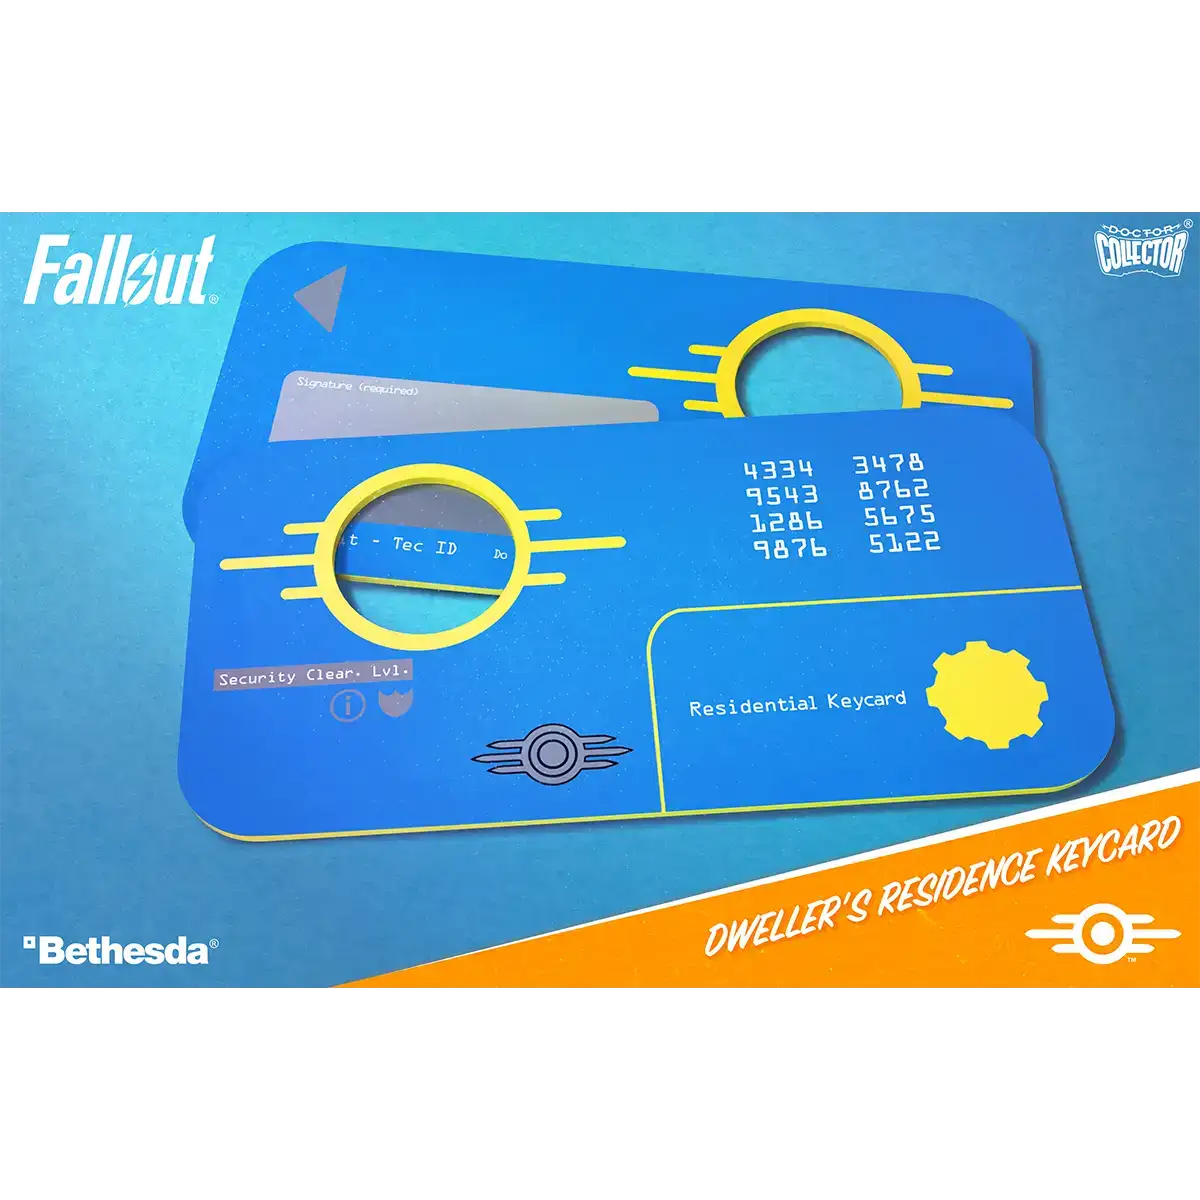 Fallout "Vault Dweller´s Welcome Kit" Image 11